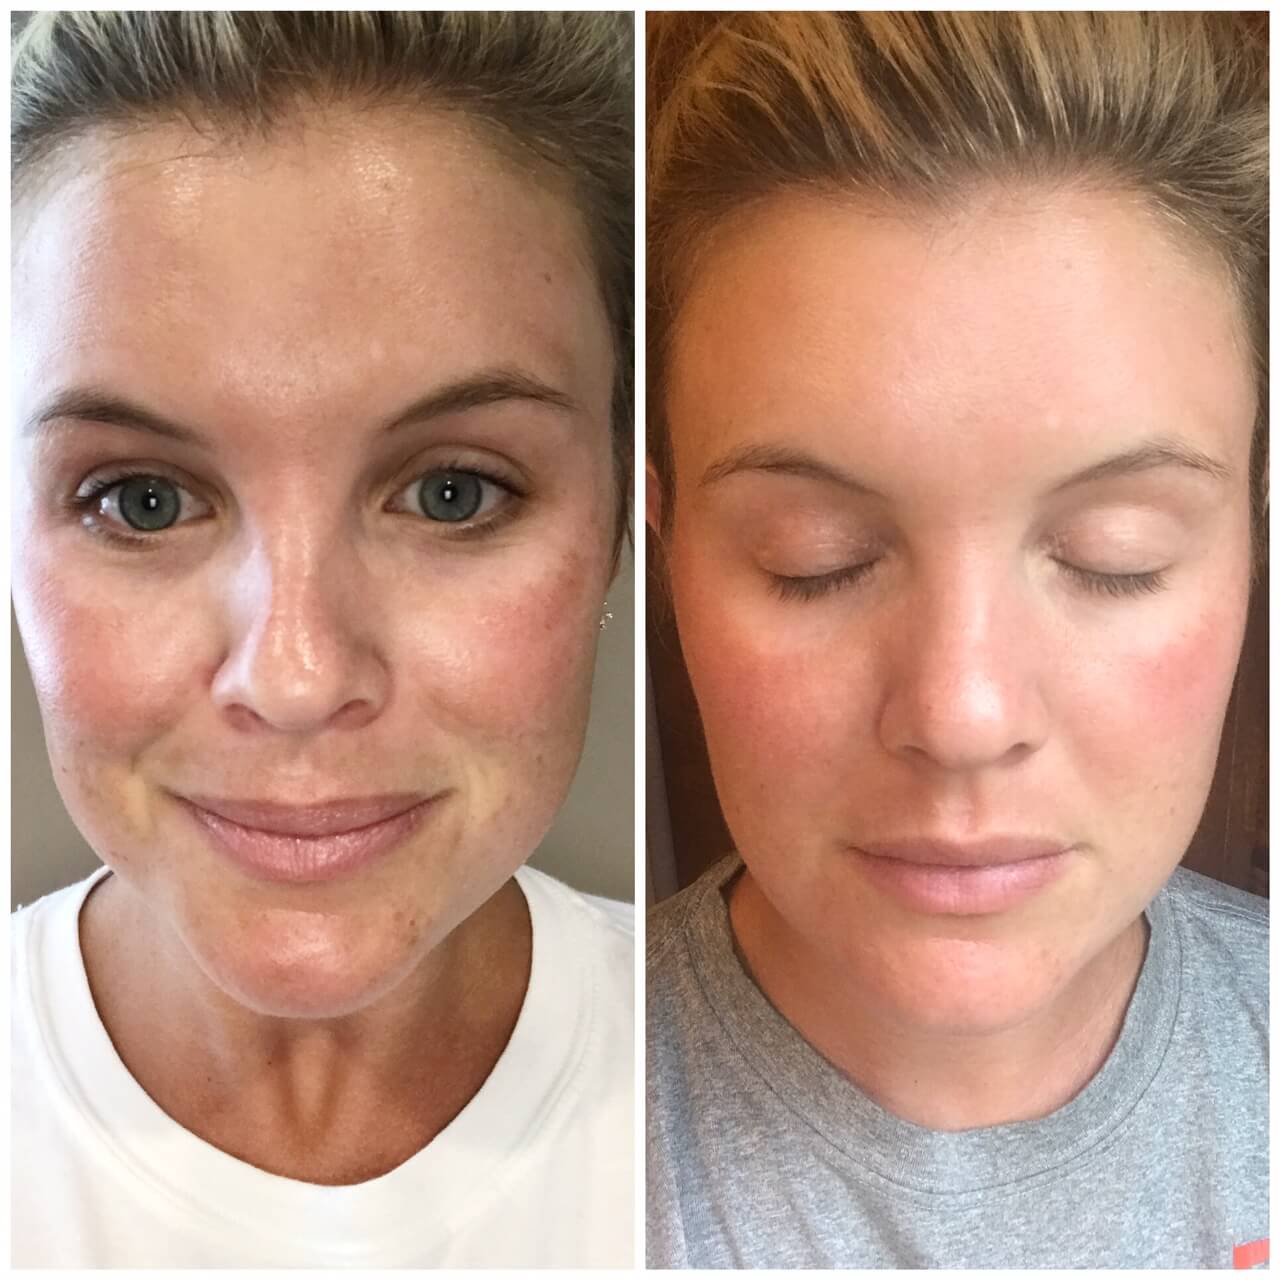 CO2 micro ablative laser treatment and microneedling, sweetgrass plastic surgery, charleston sc - Laser Treatment + Microneedling Results featured by popular South Carolina beauty blogger, The Southern Style Guide